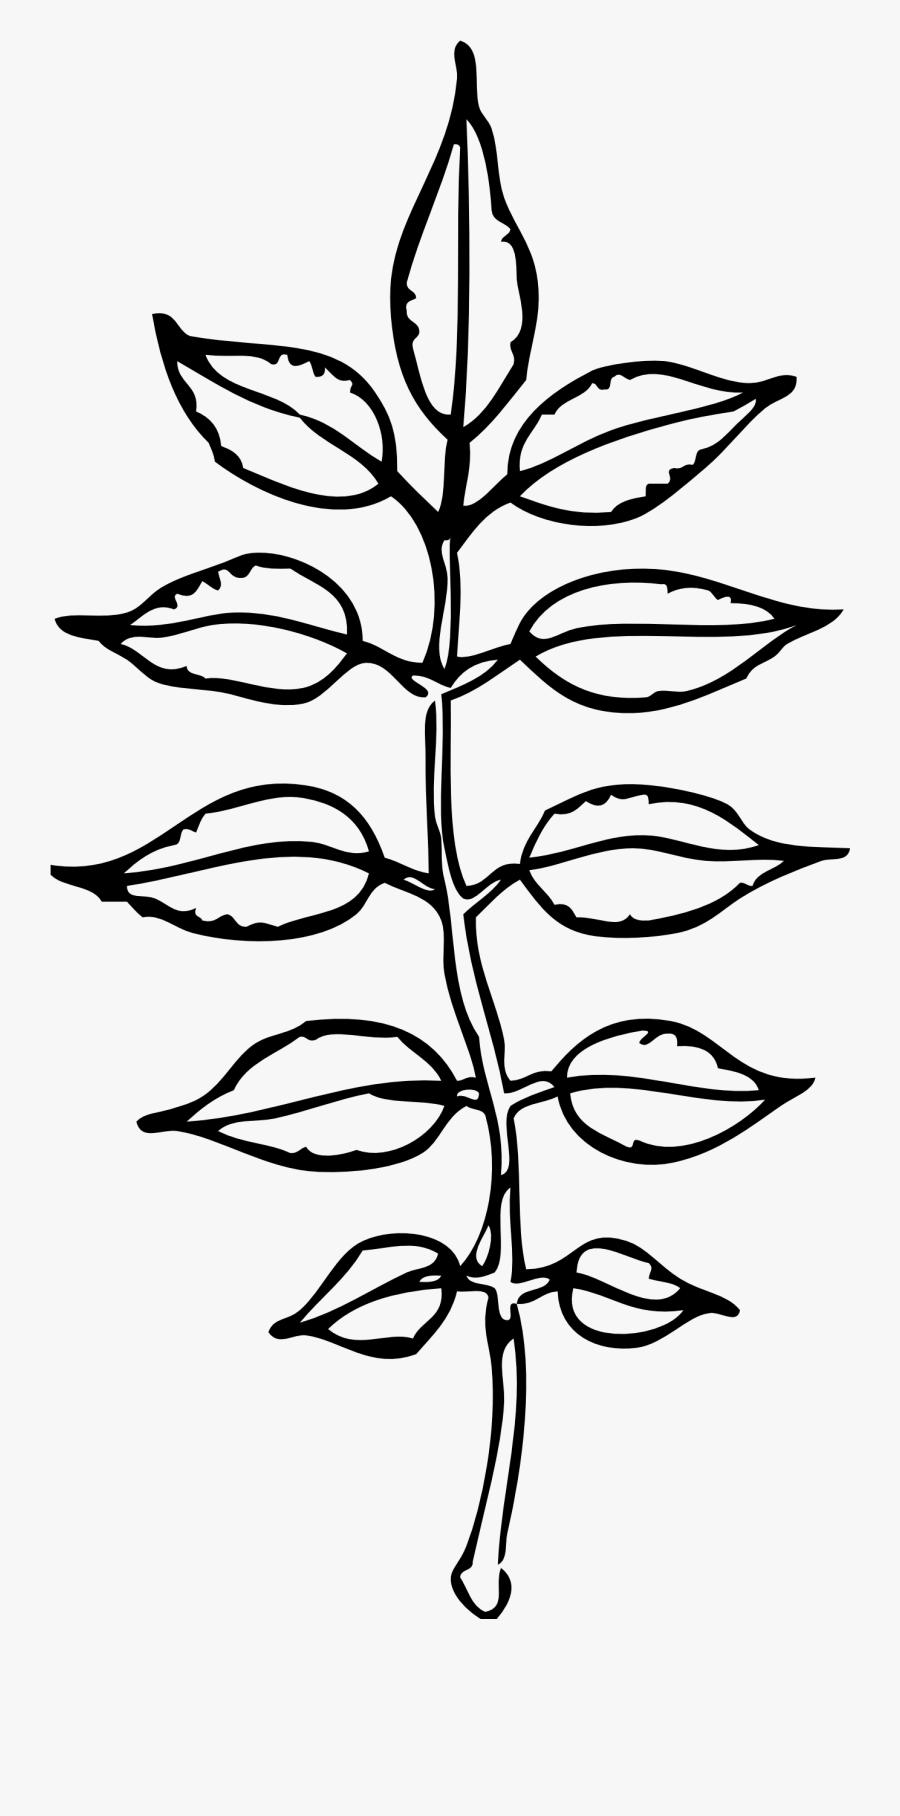 Leaf Black And White Leaves Black And White September - Leaves Black And White Clipart, Transparent Clipart